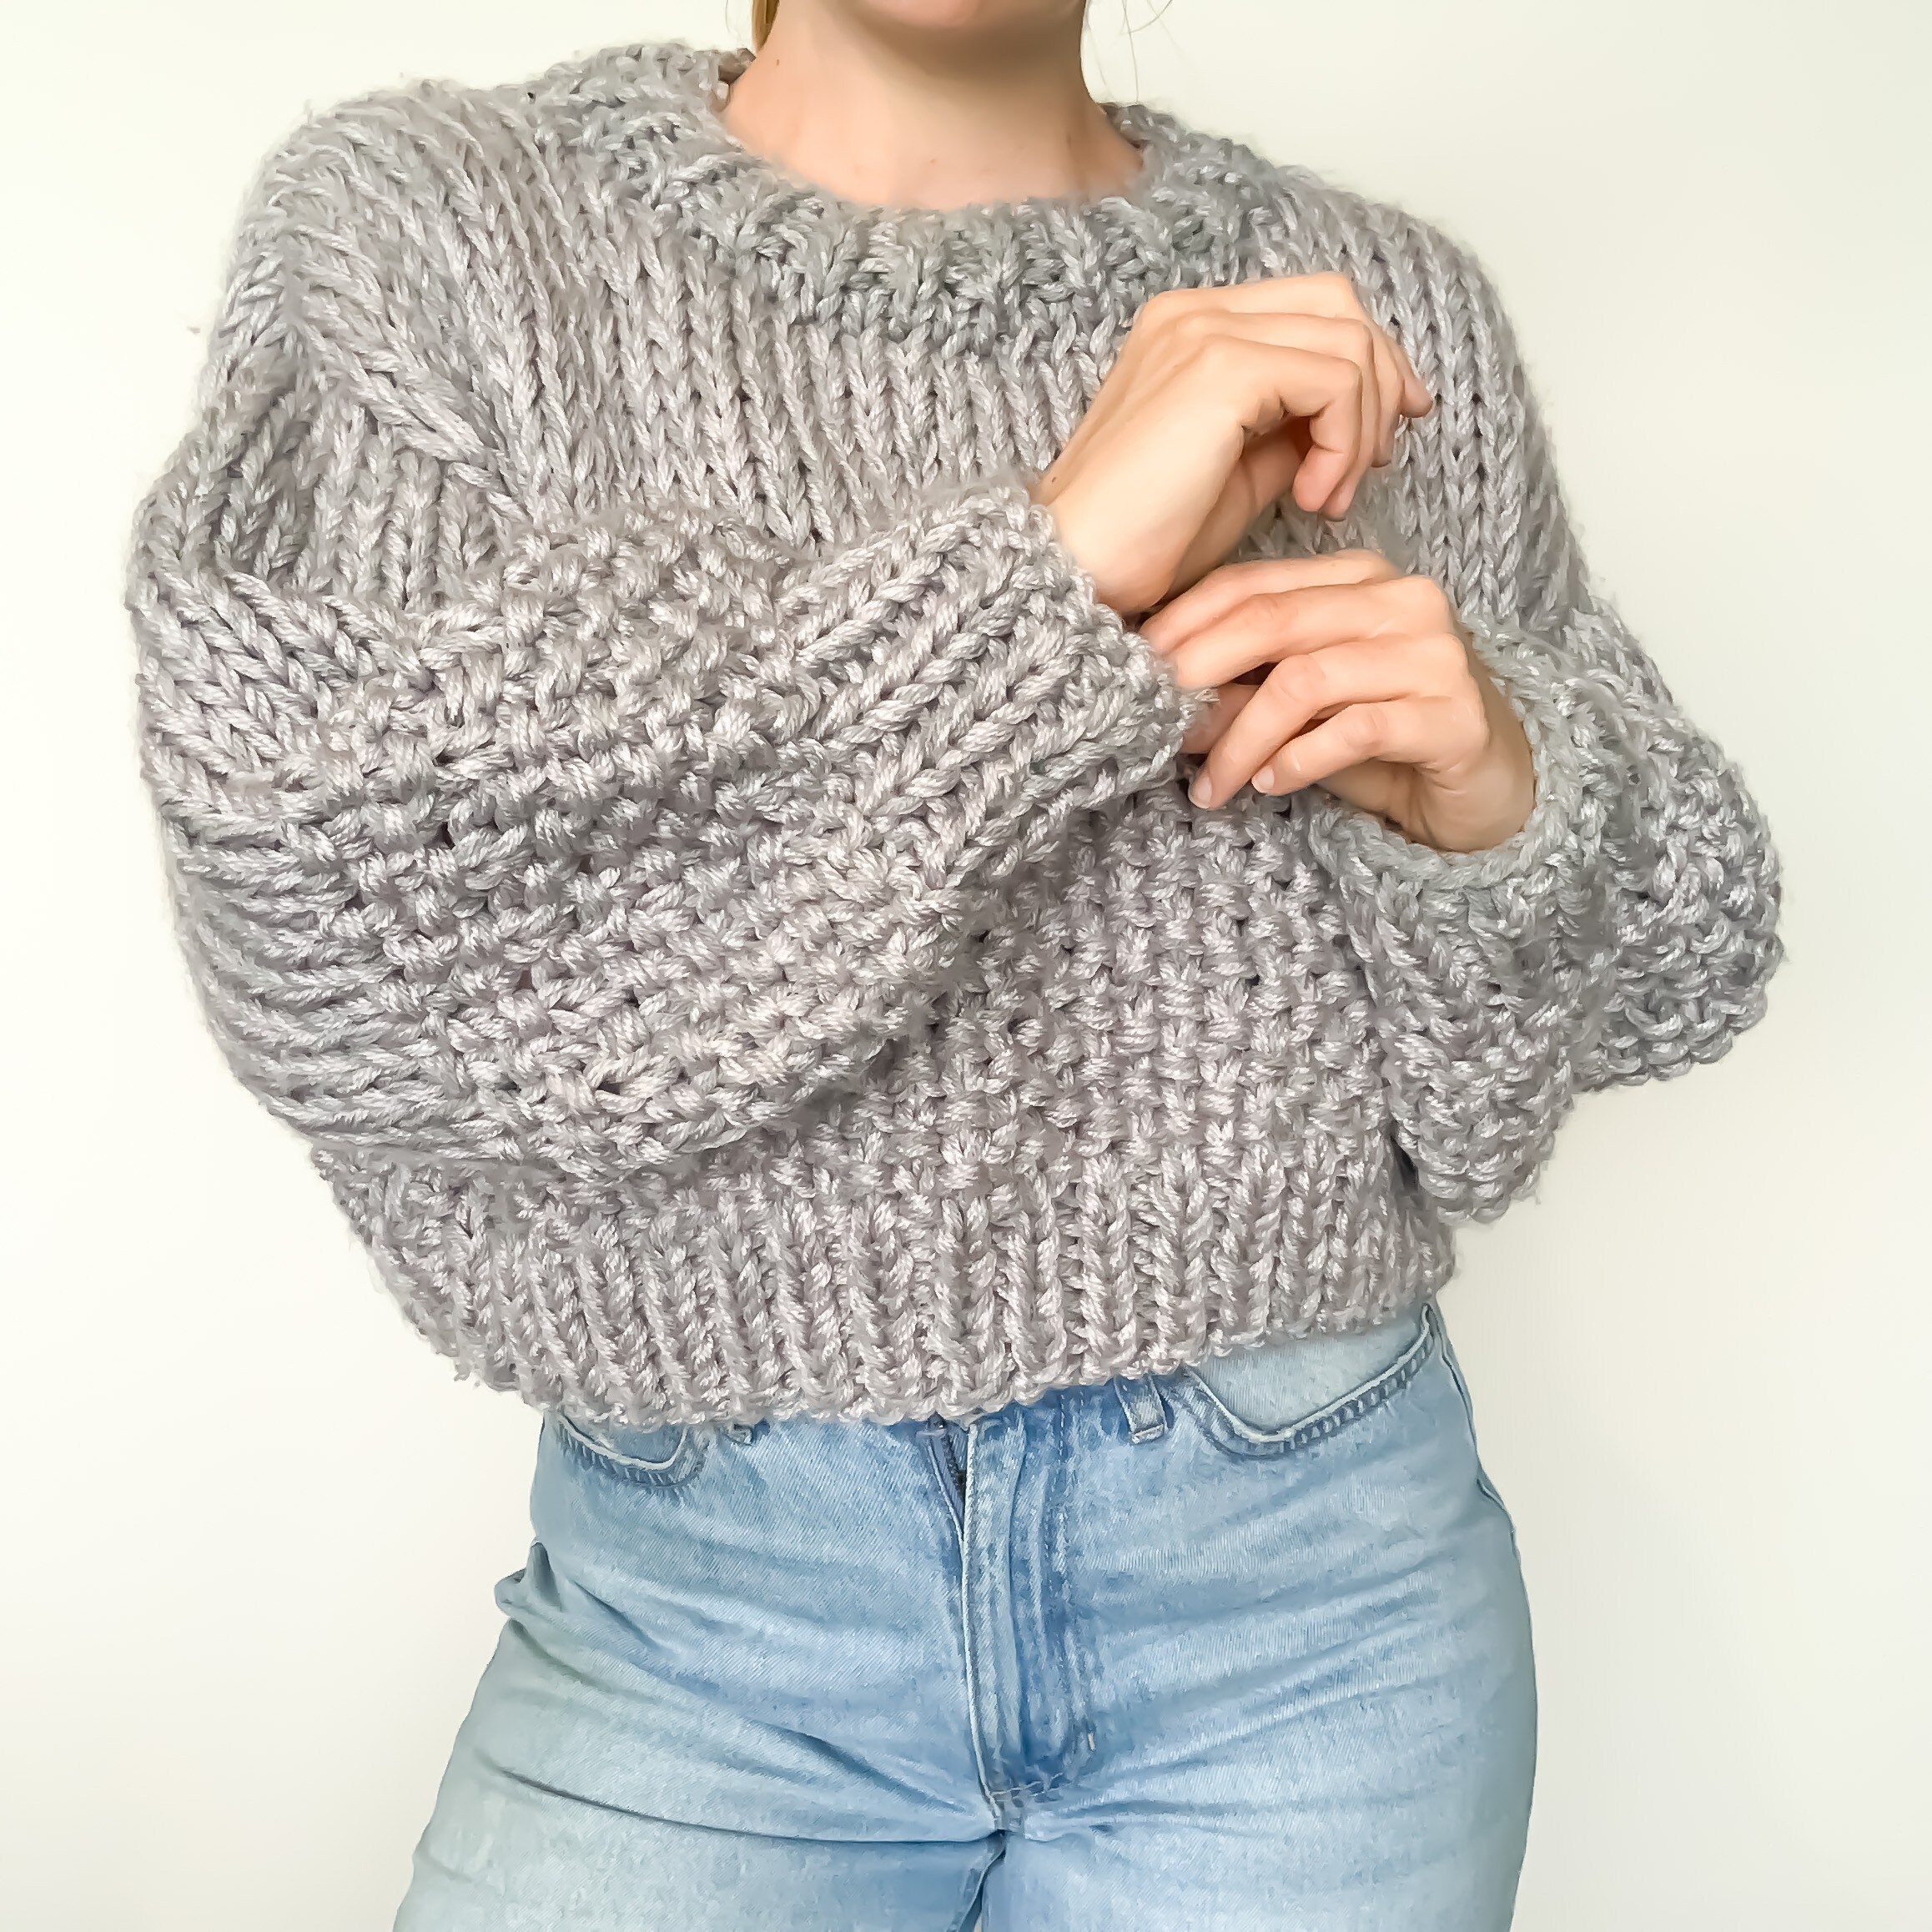 Chunky Knitted Sweater Pattern PDF Knitting Pattern by Girl - Etsy ...